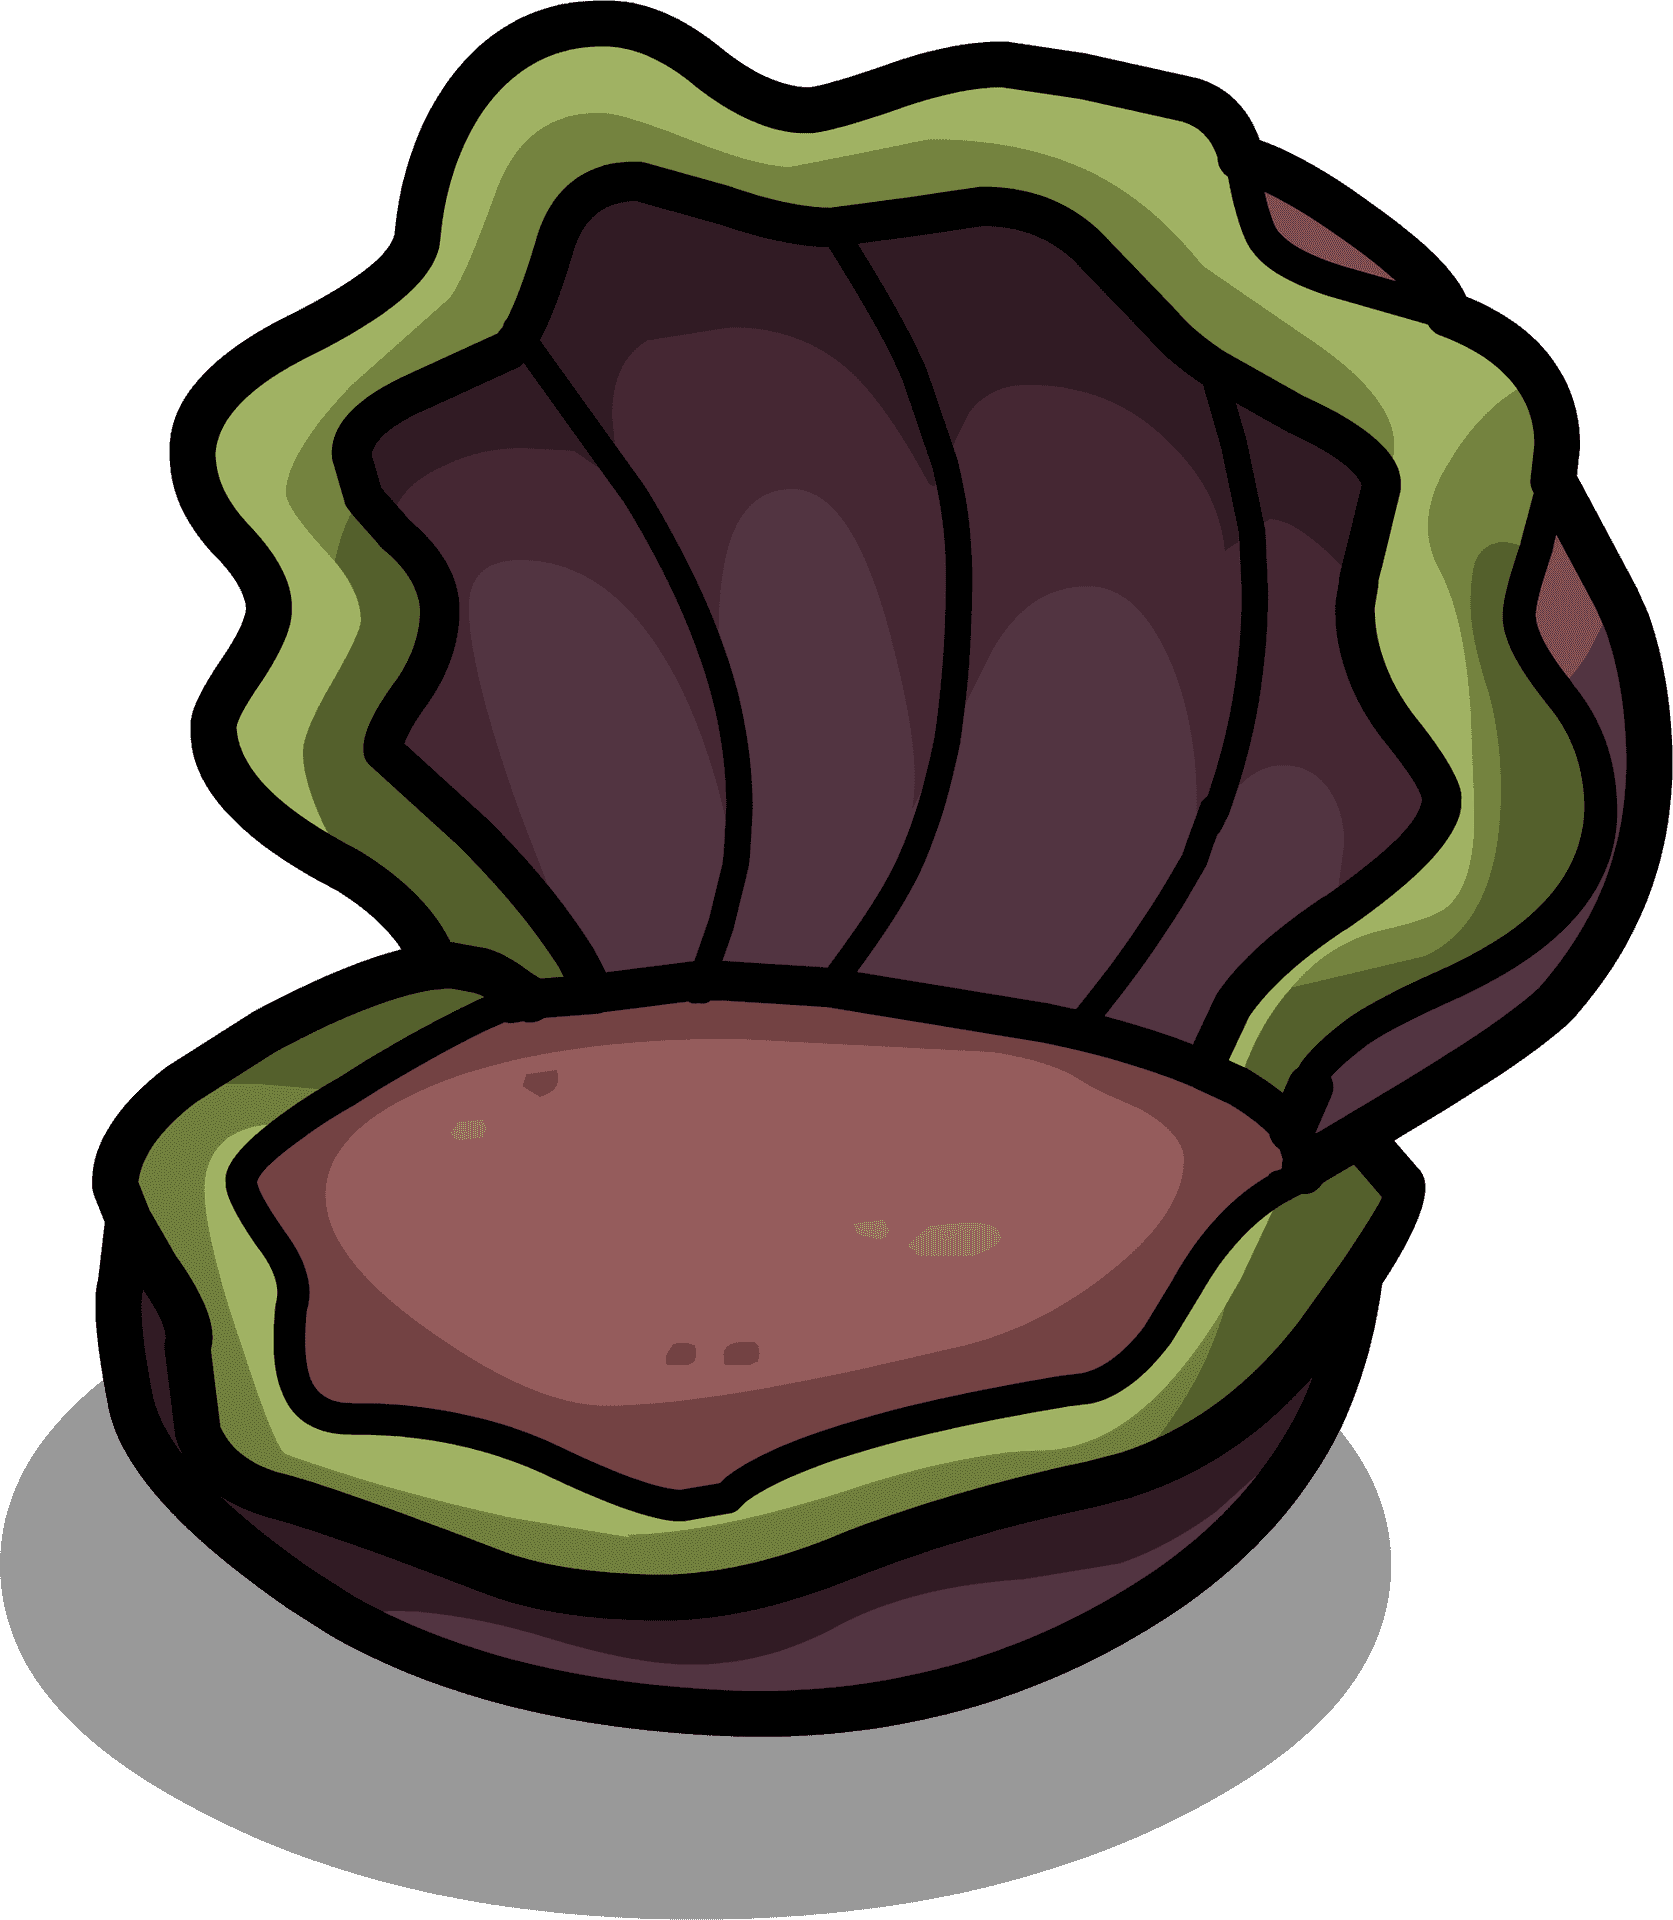 Colorful Clam Cartoon Illustration PNG image